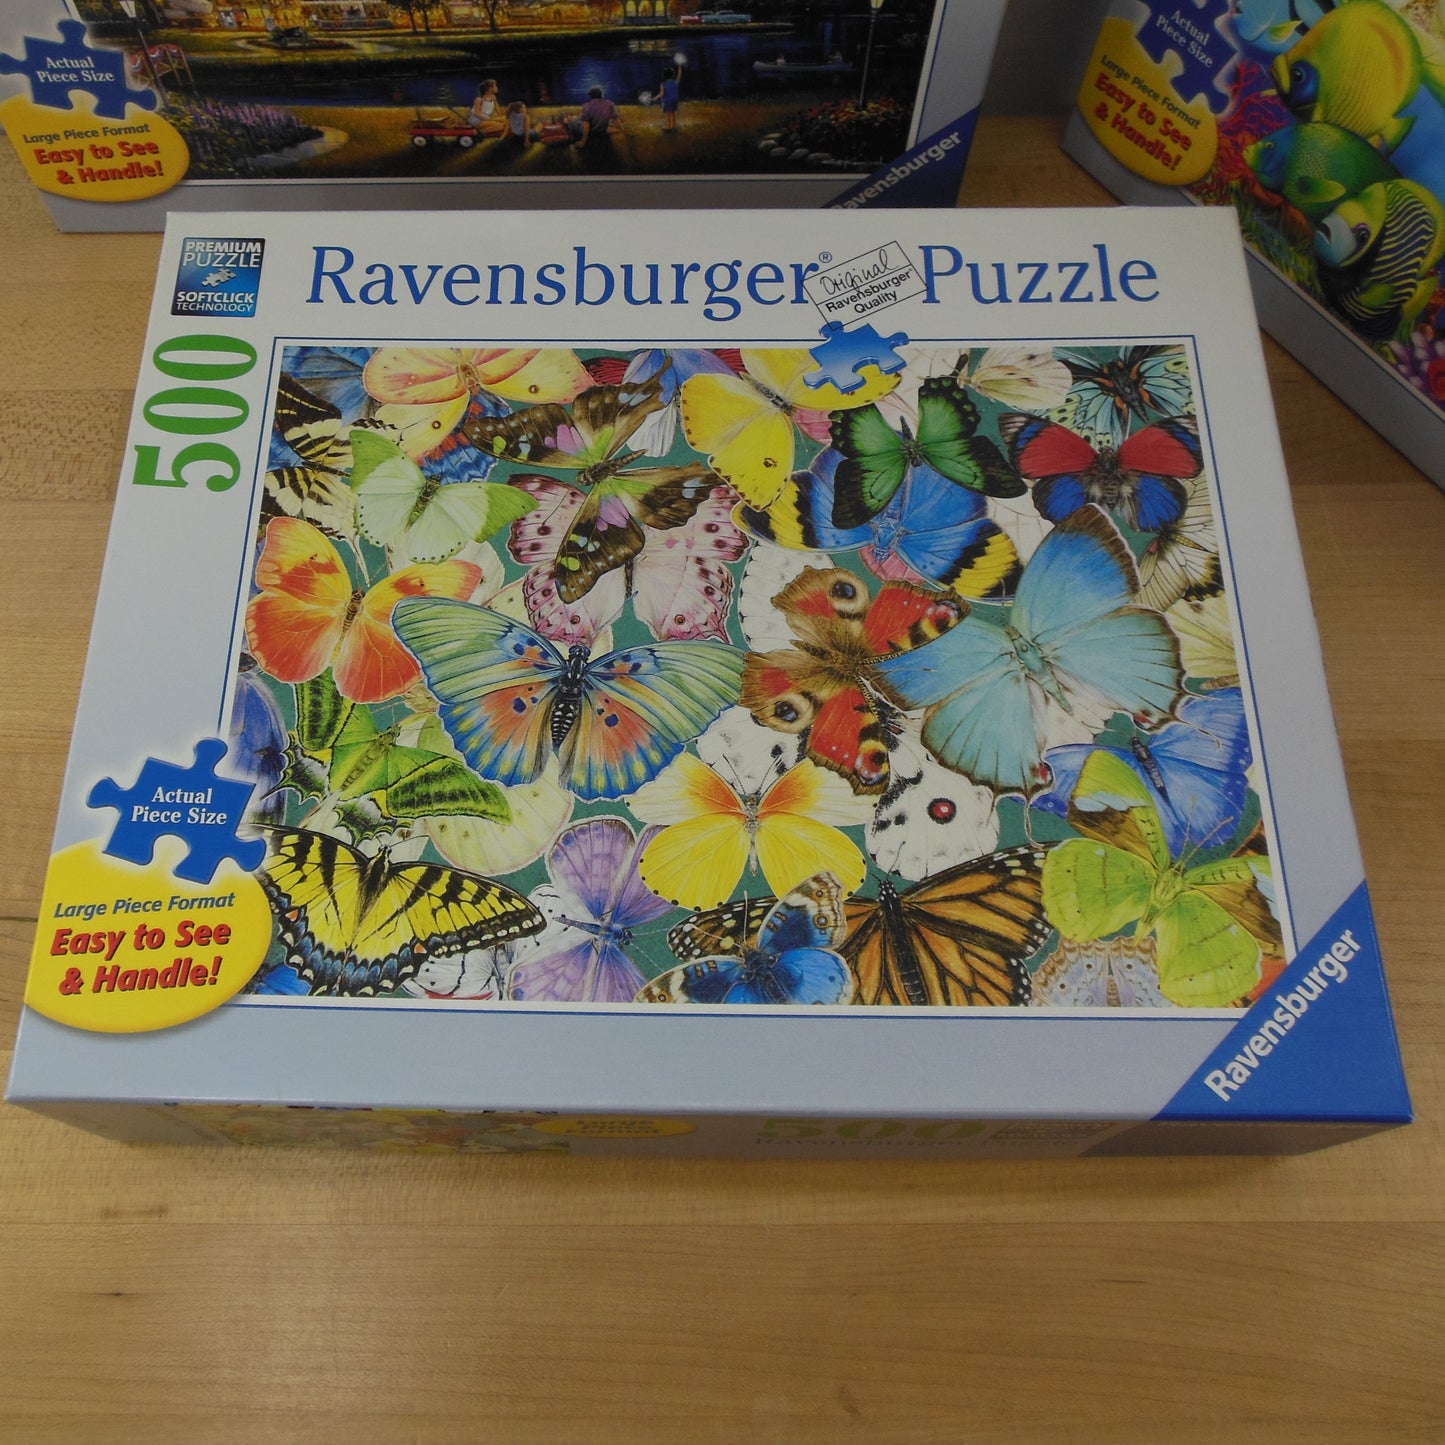 Ravensburger Puzzle 3 Lot 500 Large Pieces Star Spangled Underwater Smiles Butterflies Used